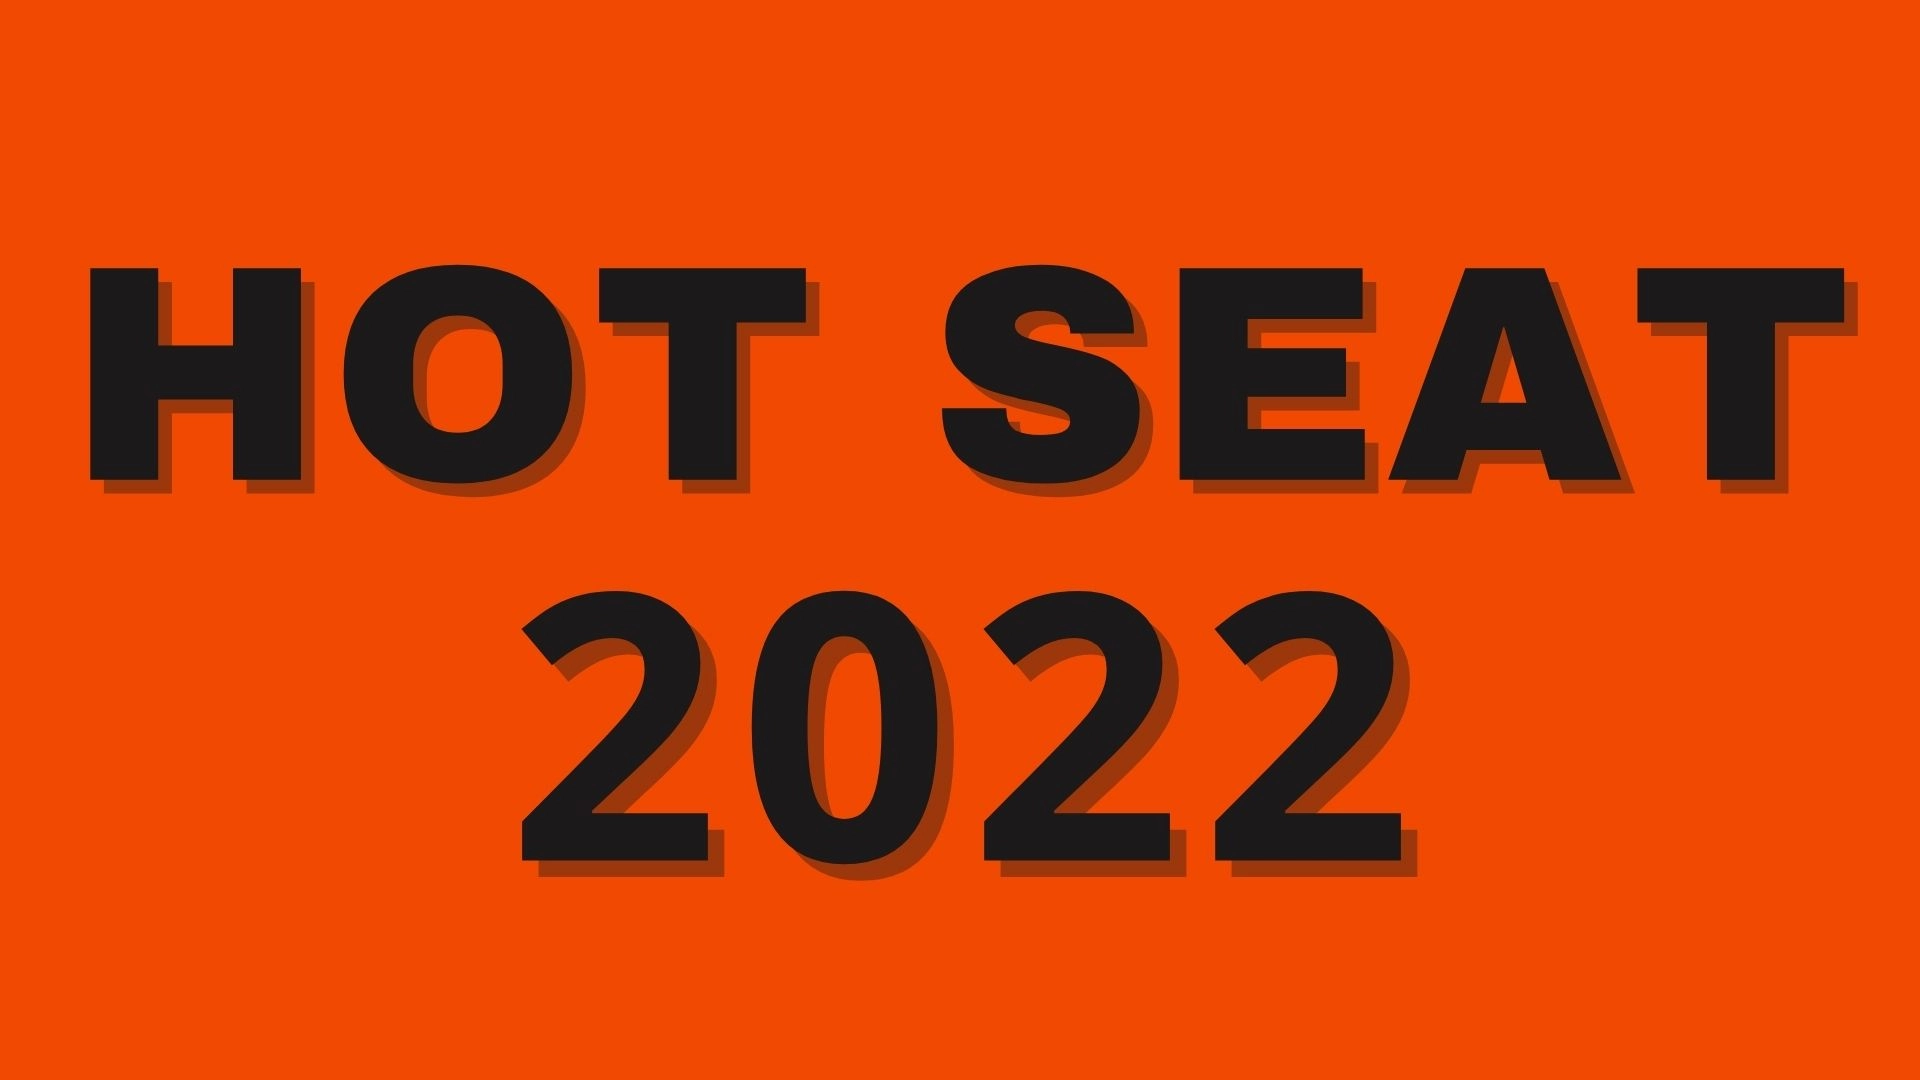 Hot Seat Parents Guide | Hot Seat Age Rating (2022 Film)